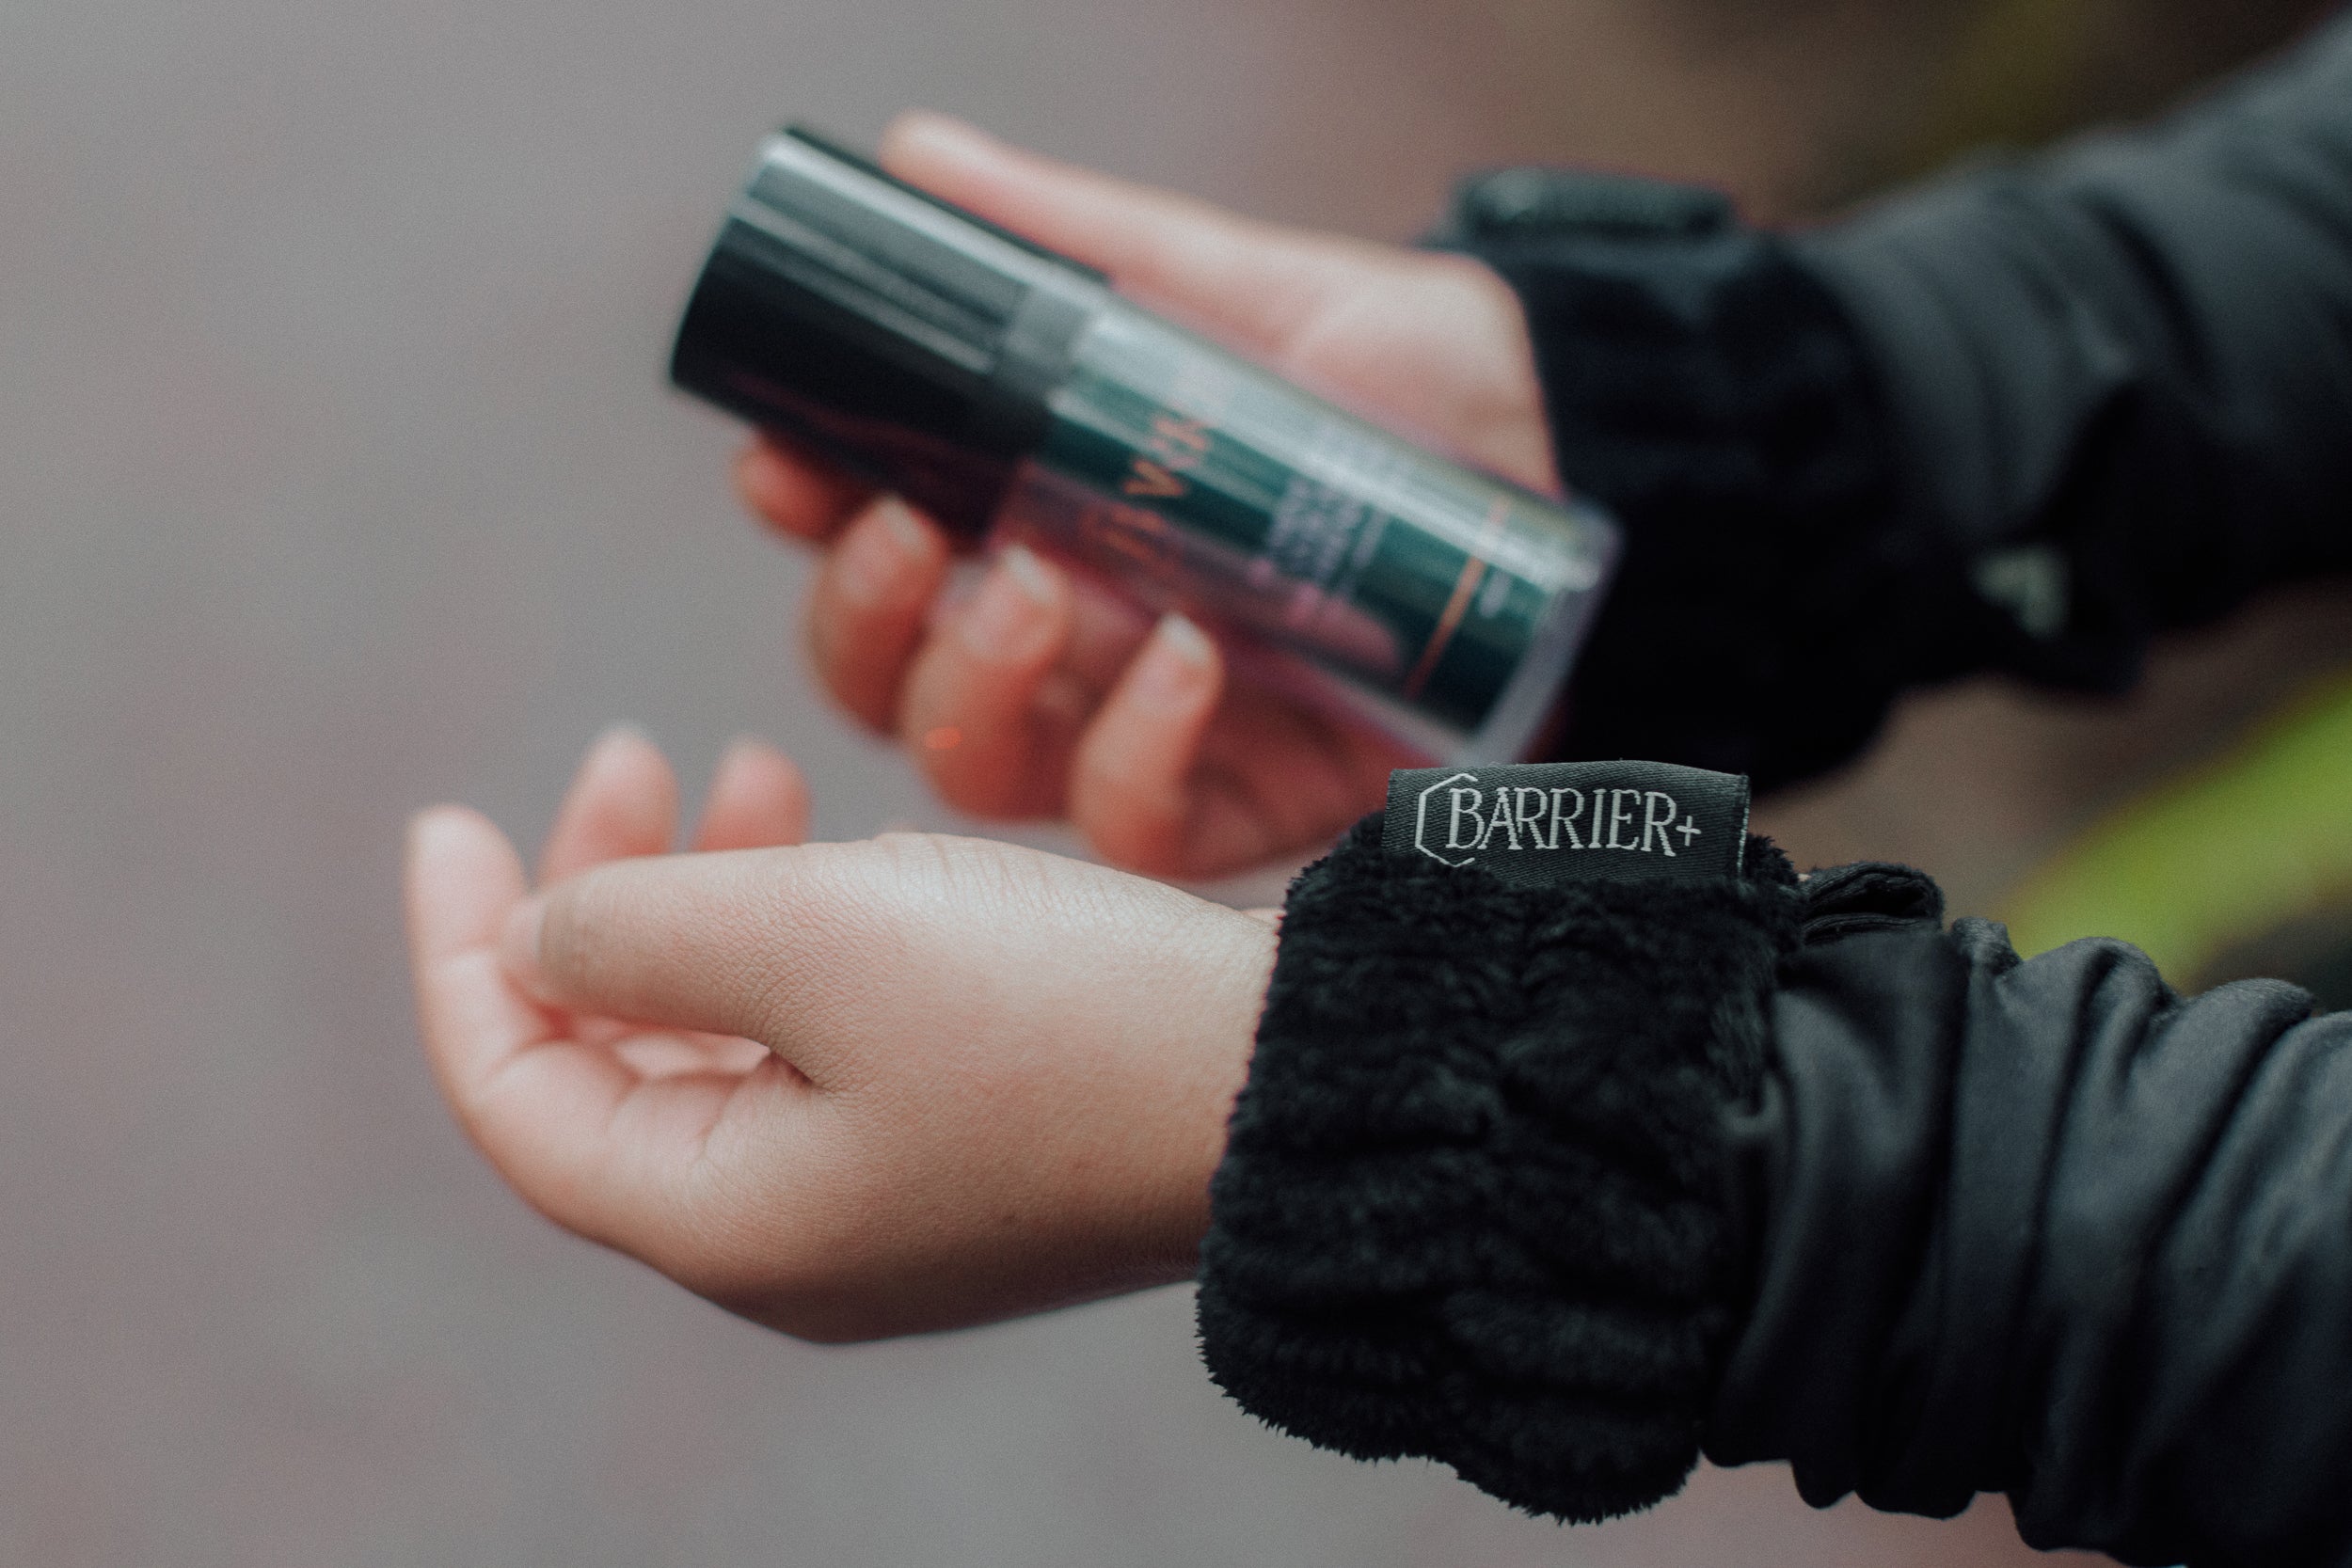 Black wrist band with name Barrier Plus on it and a bottle of Barrier Plus Skincare Serum